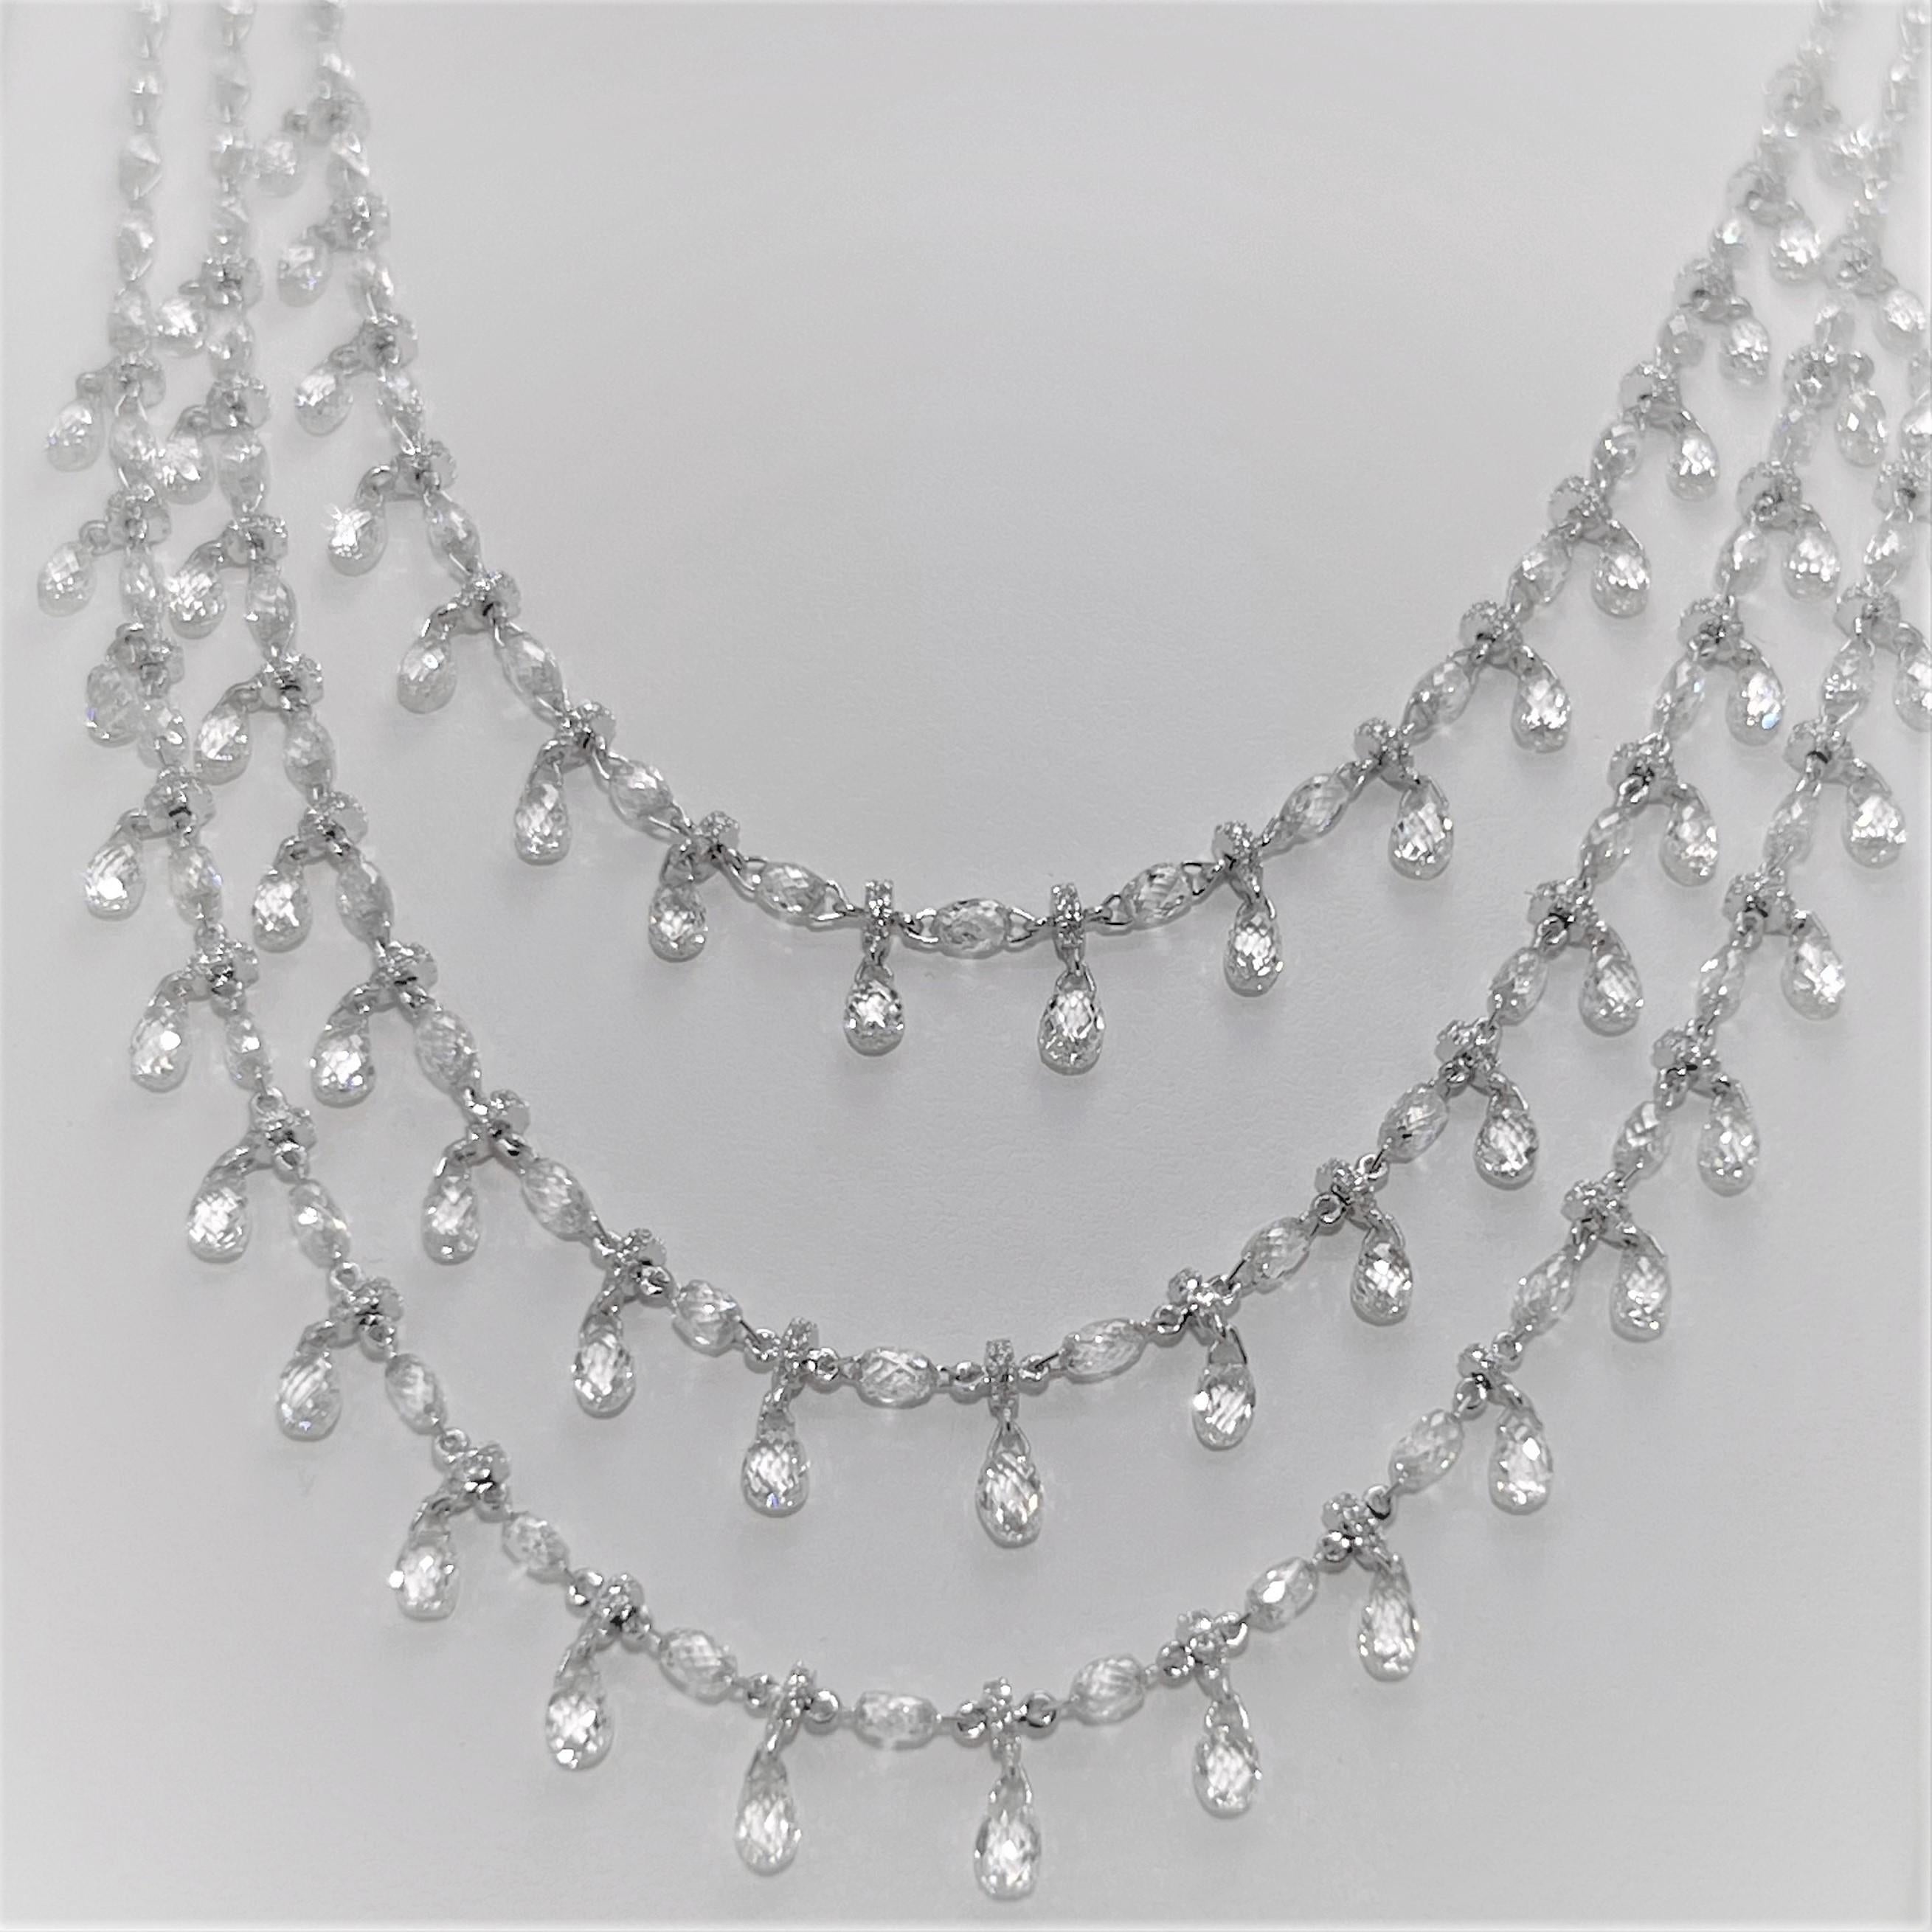 This is a fabulous 1920 inspired vintage style with intriguing 3-row Briolette Cut Diamond Necklace.  Embellished with 841 Diamonds weighing 38.89 carats in total, this remarkable multi strand necklace is set on 18 Karat White Gold.  A perfect